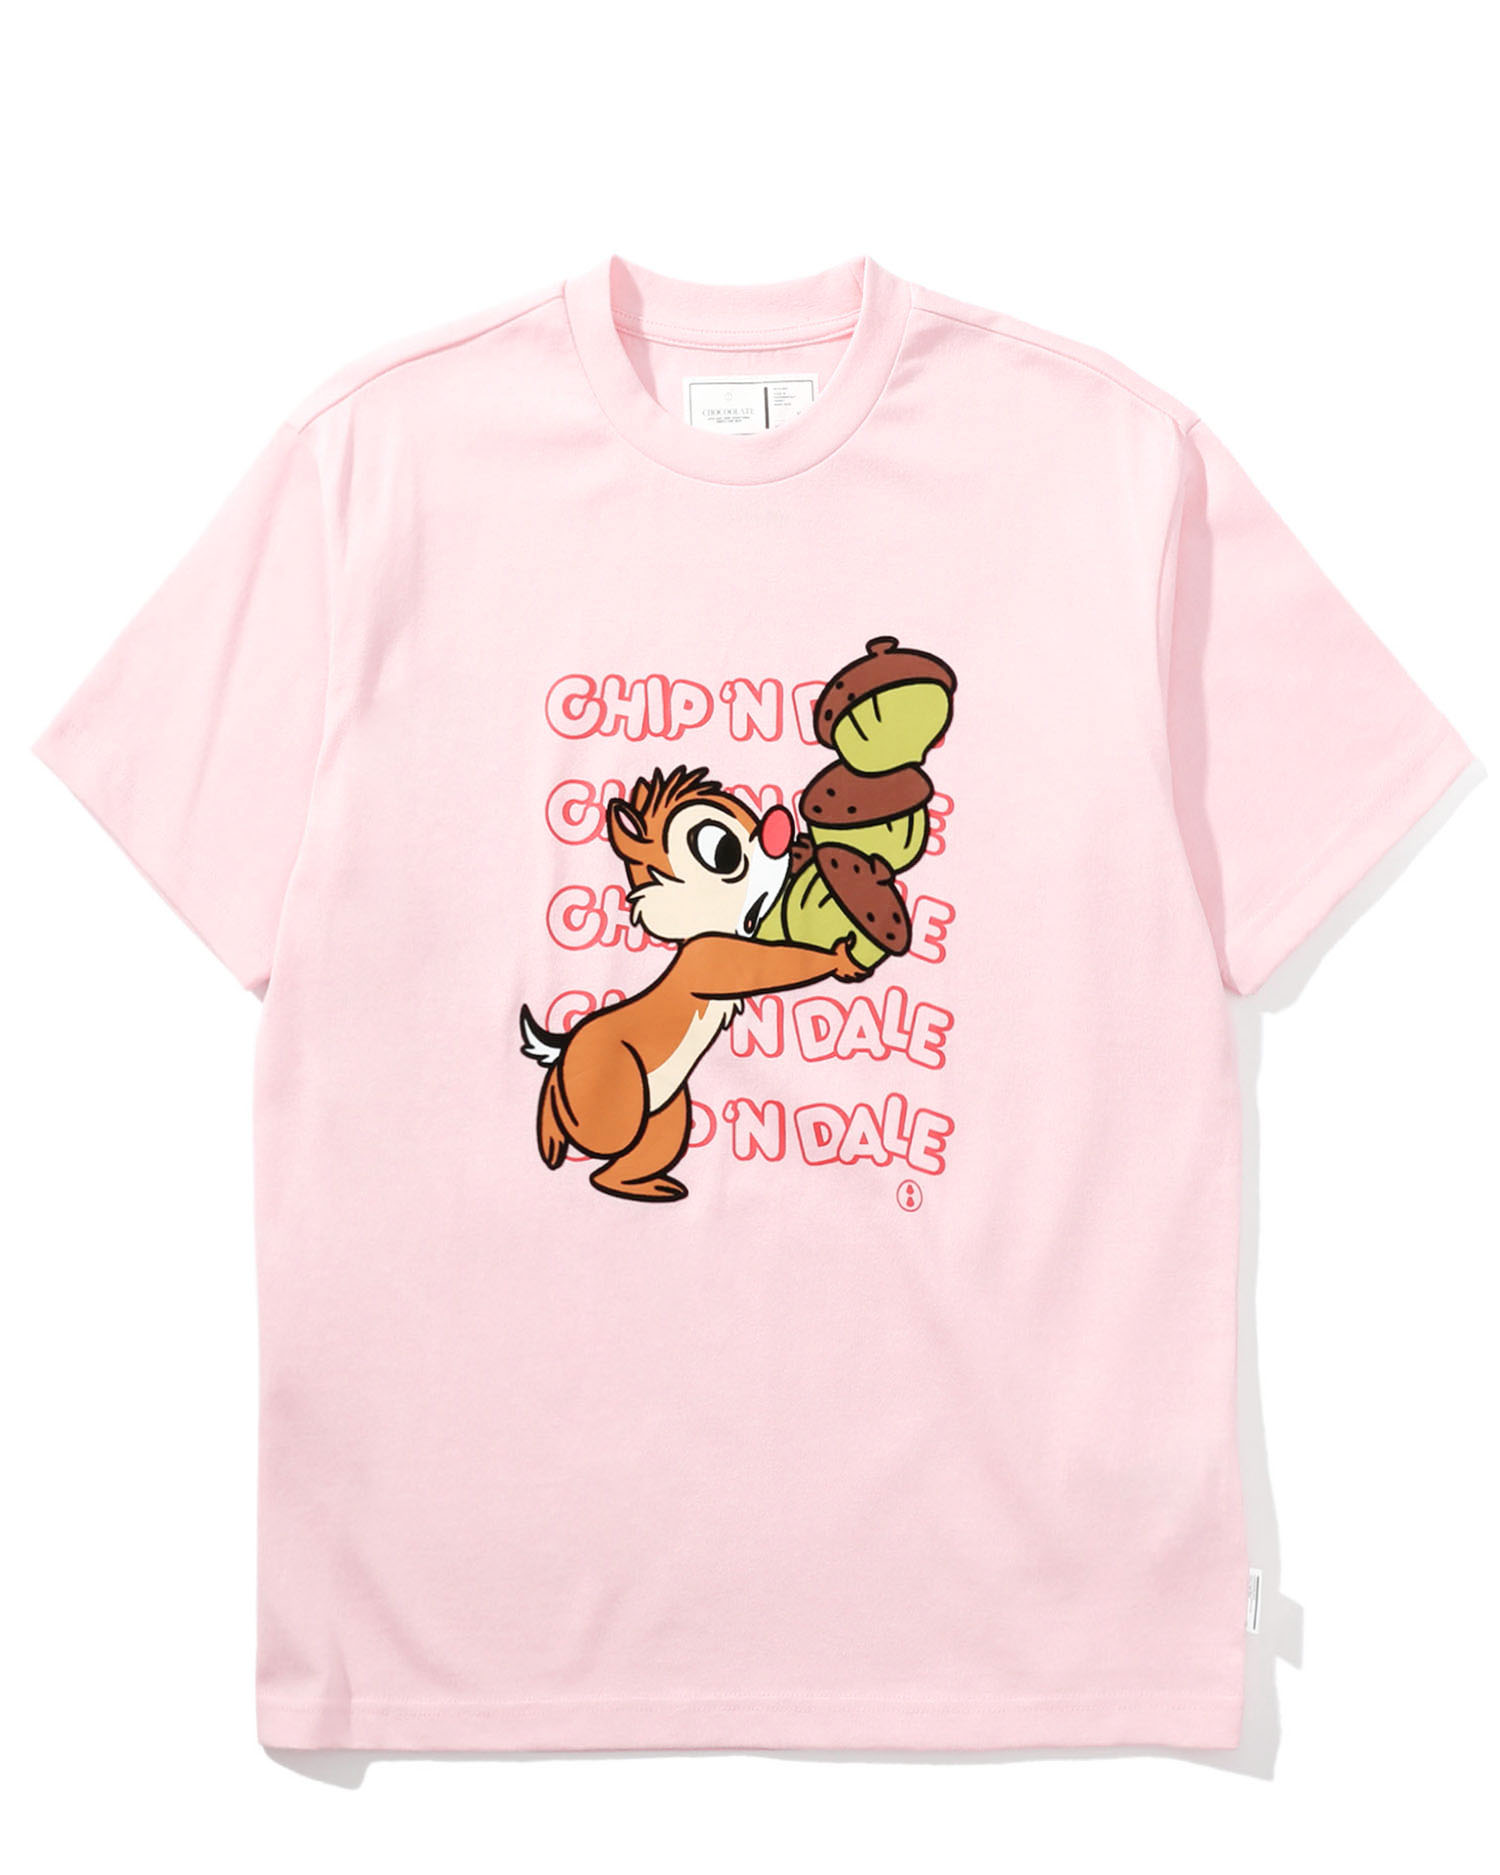 chip and dale shirt